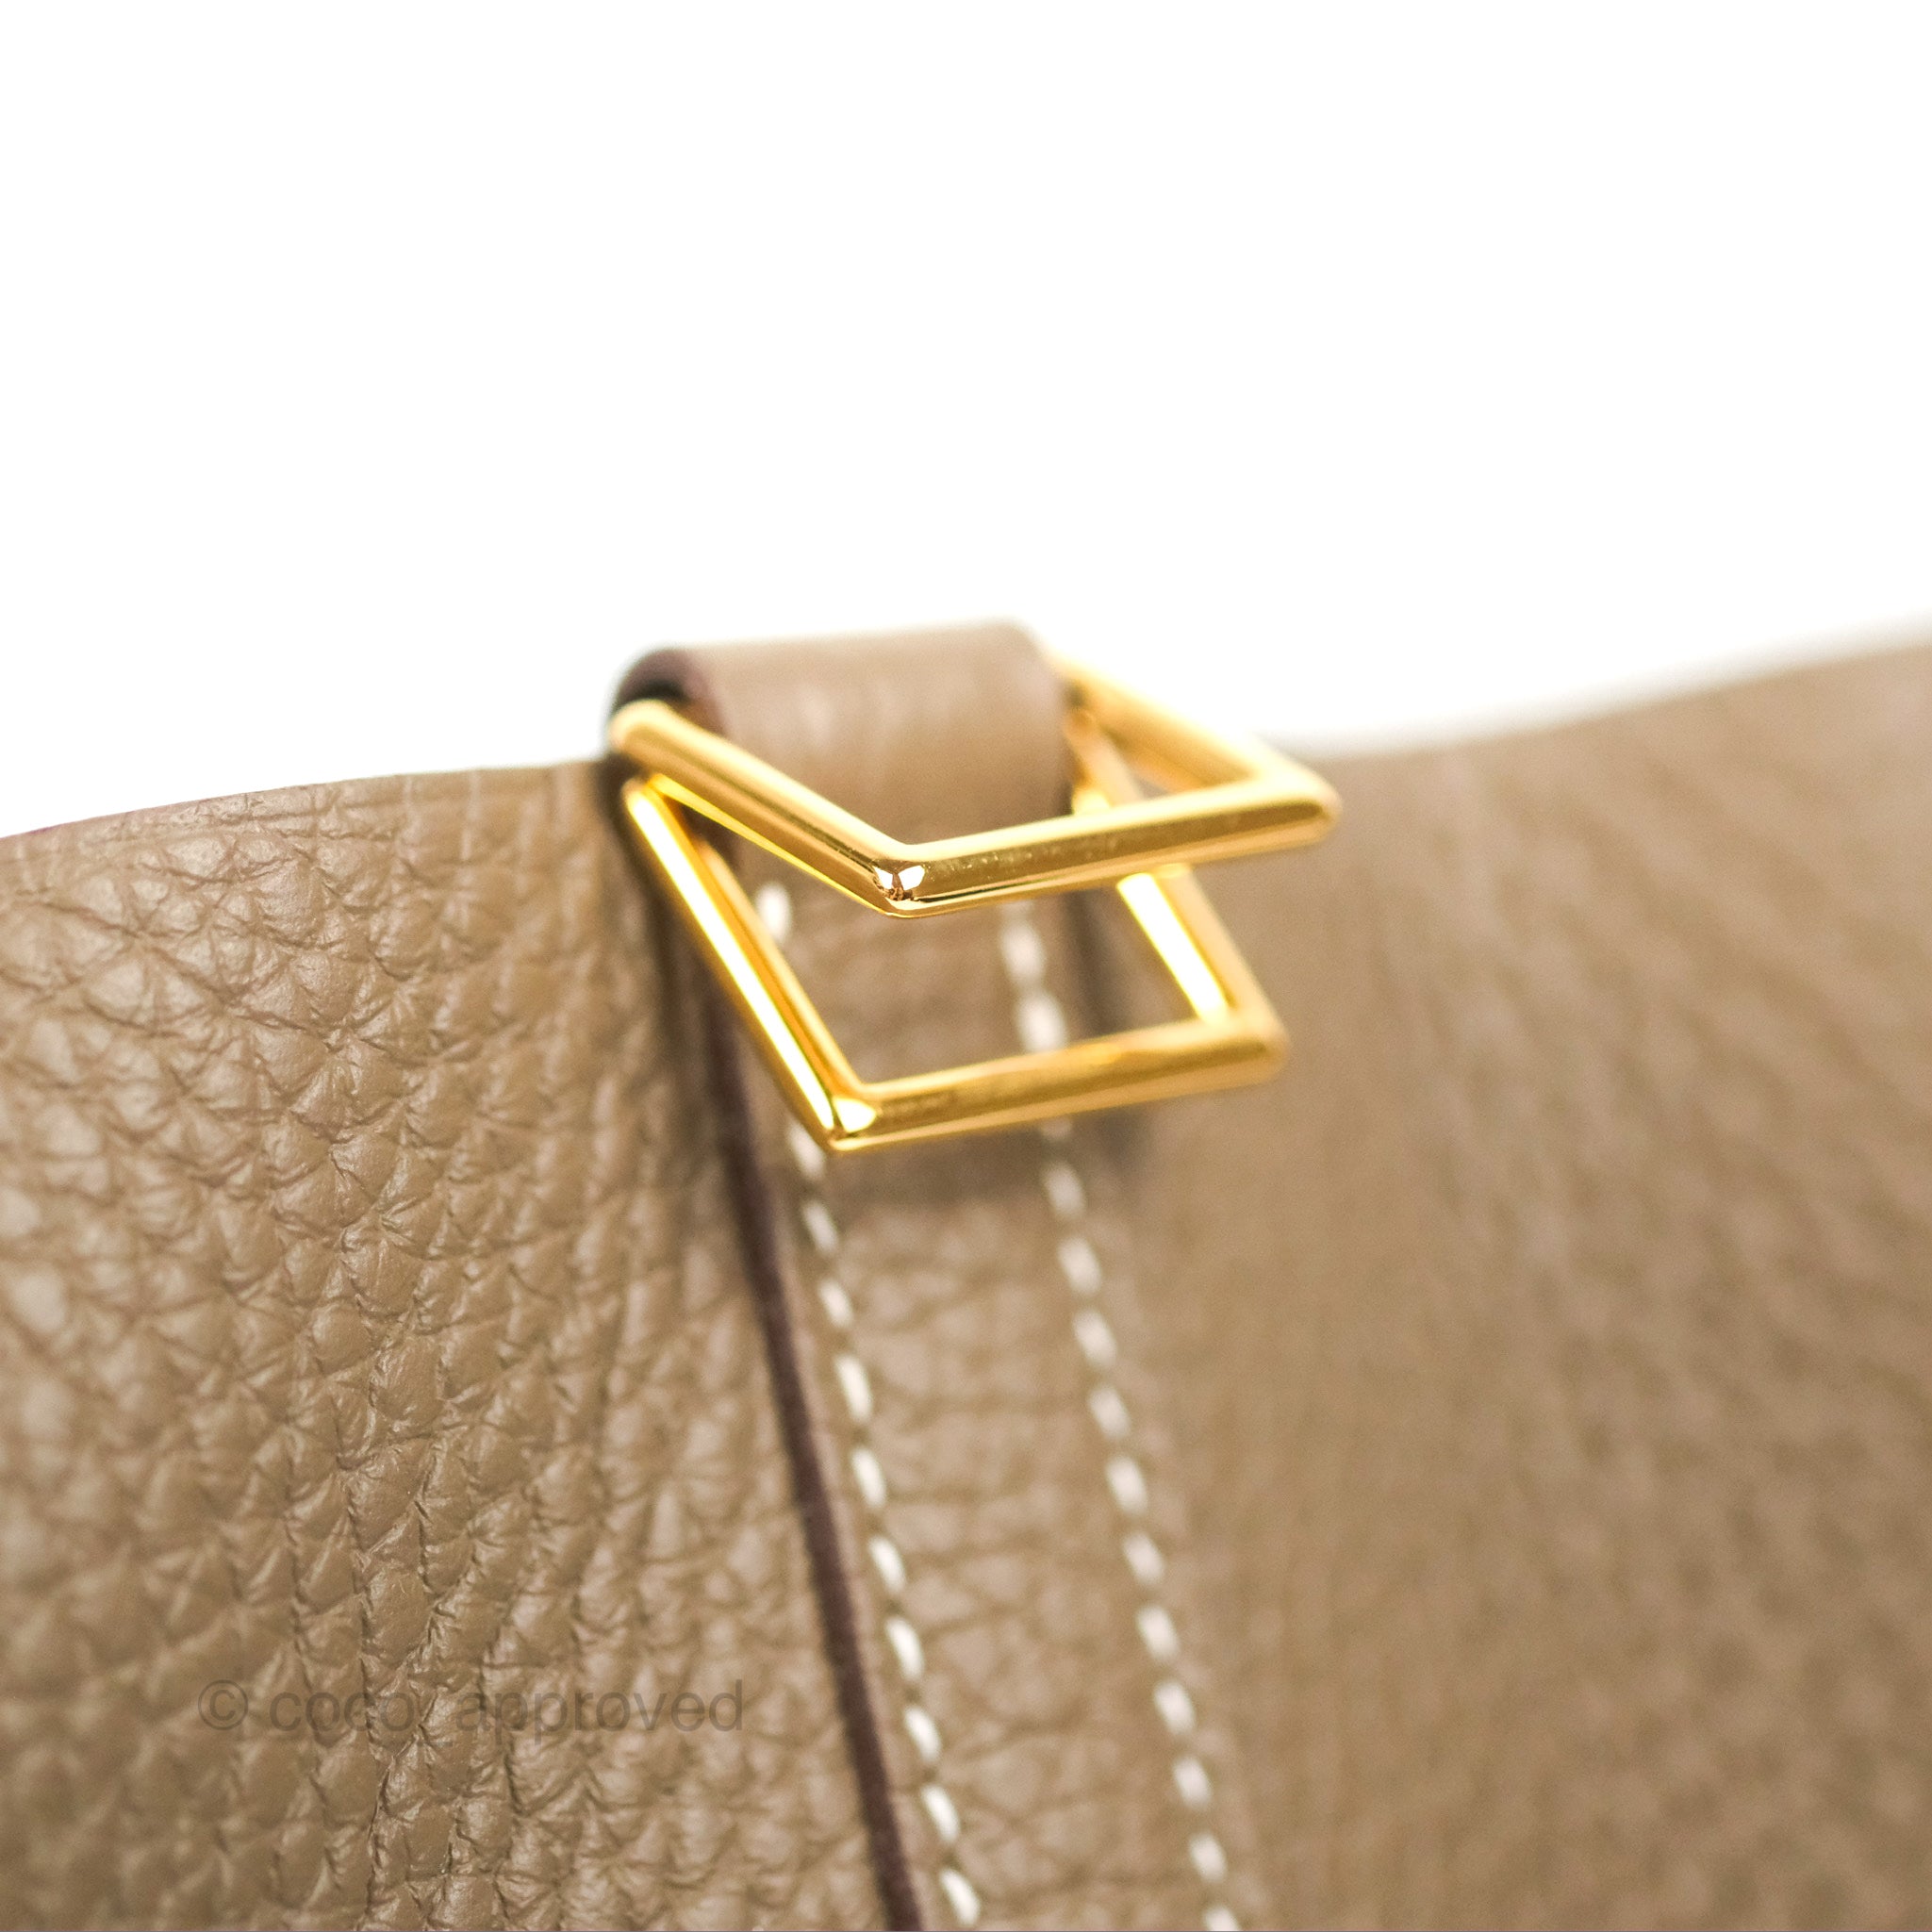 Hermès Taurillon Clemence Picotin Lock 18 PM Etoupe Gold Hardware – Coco  Approved Studio